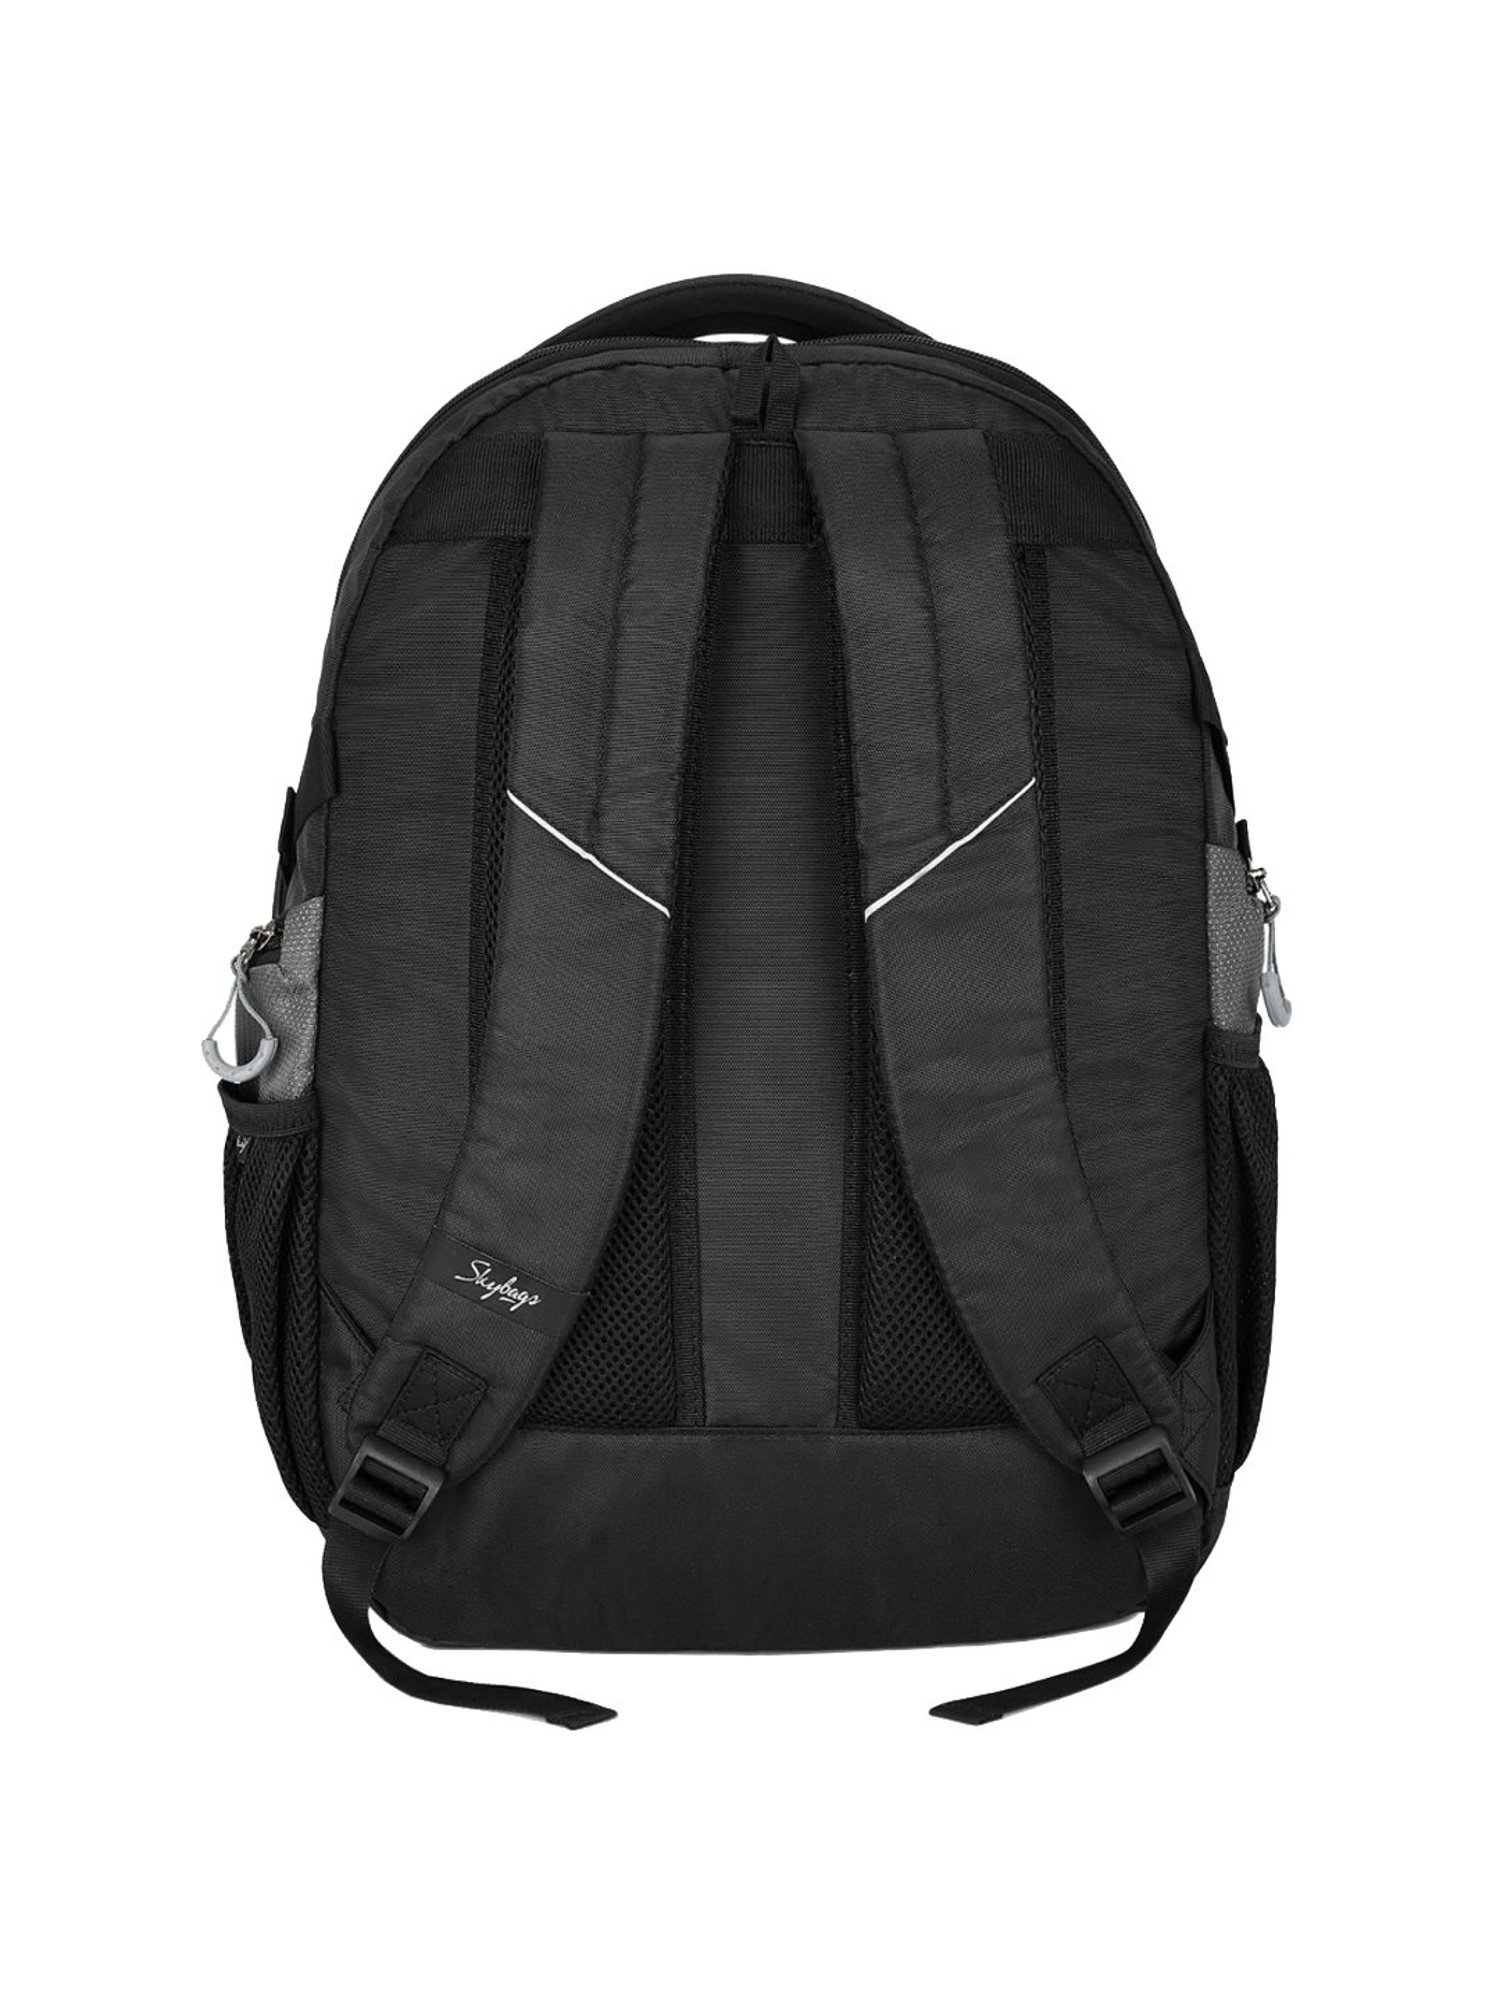 Skybag Octane-G Black Laptop Backpack in bulk for corporate gifting | Skybags  Backpack, Haversack wholesale distributor & supplier in Mumbai India